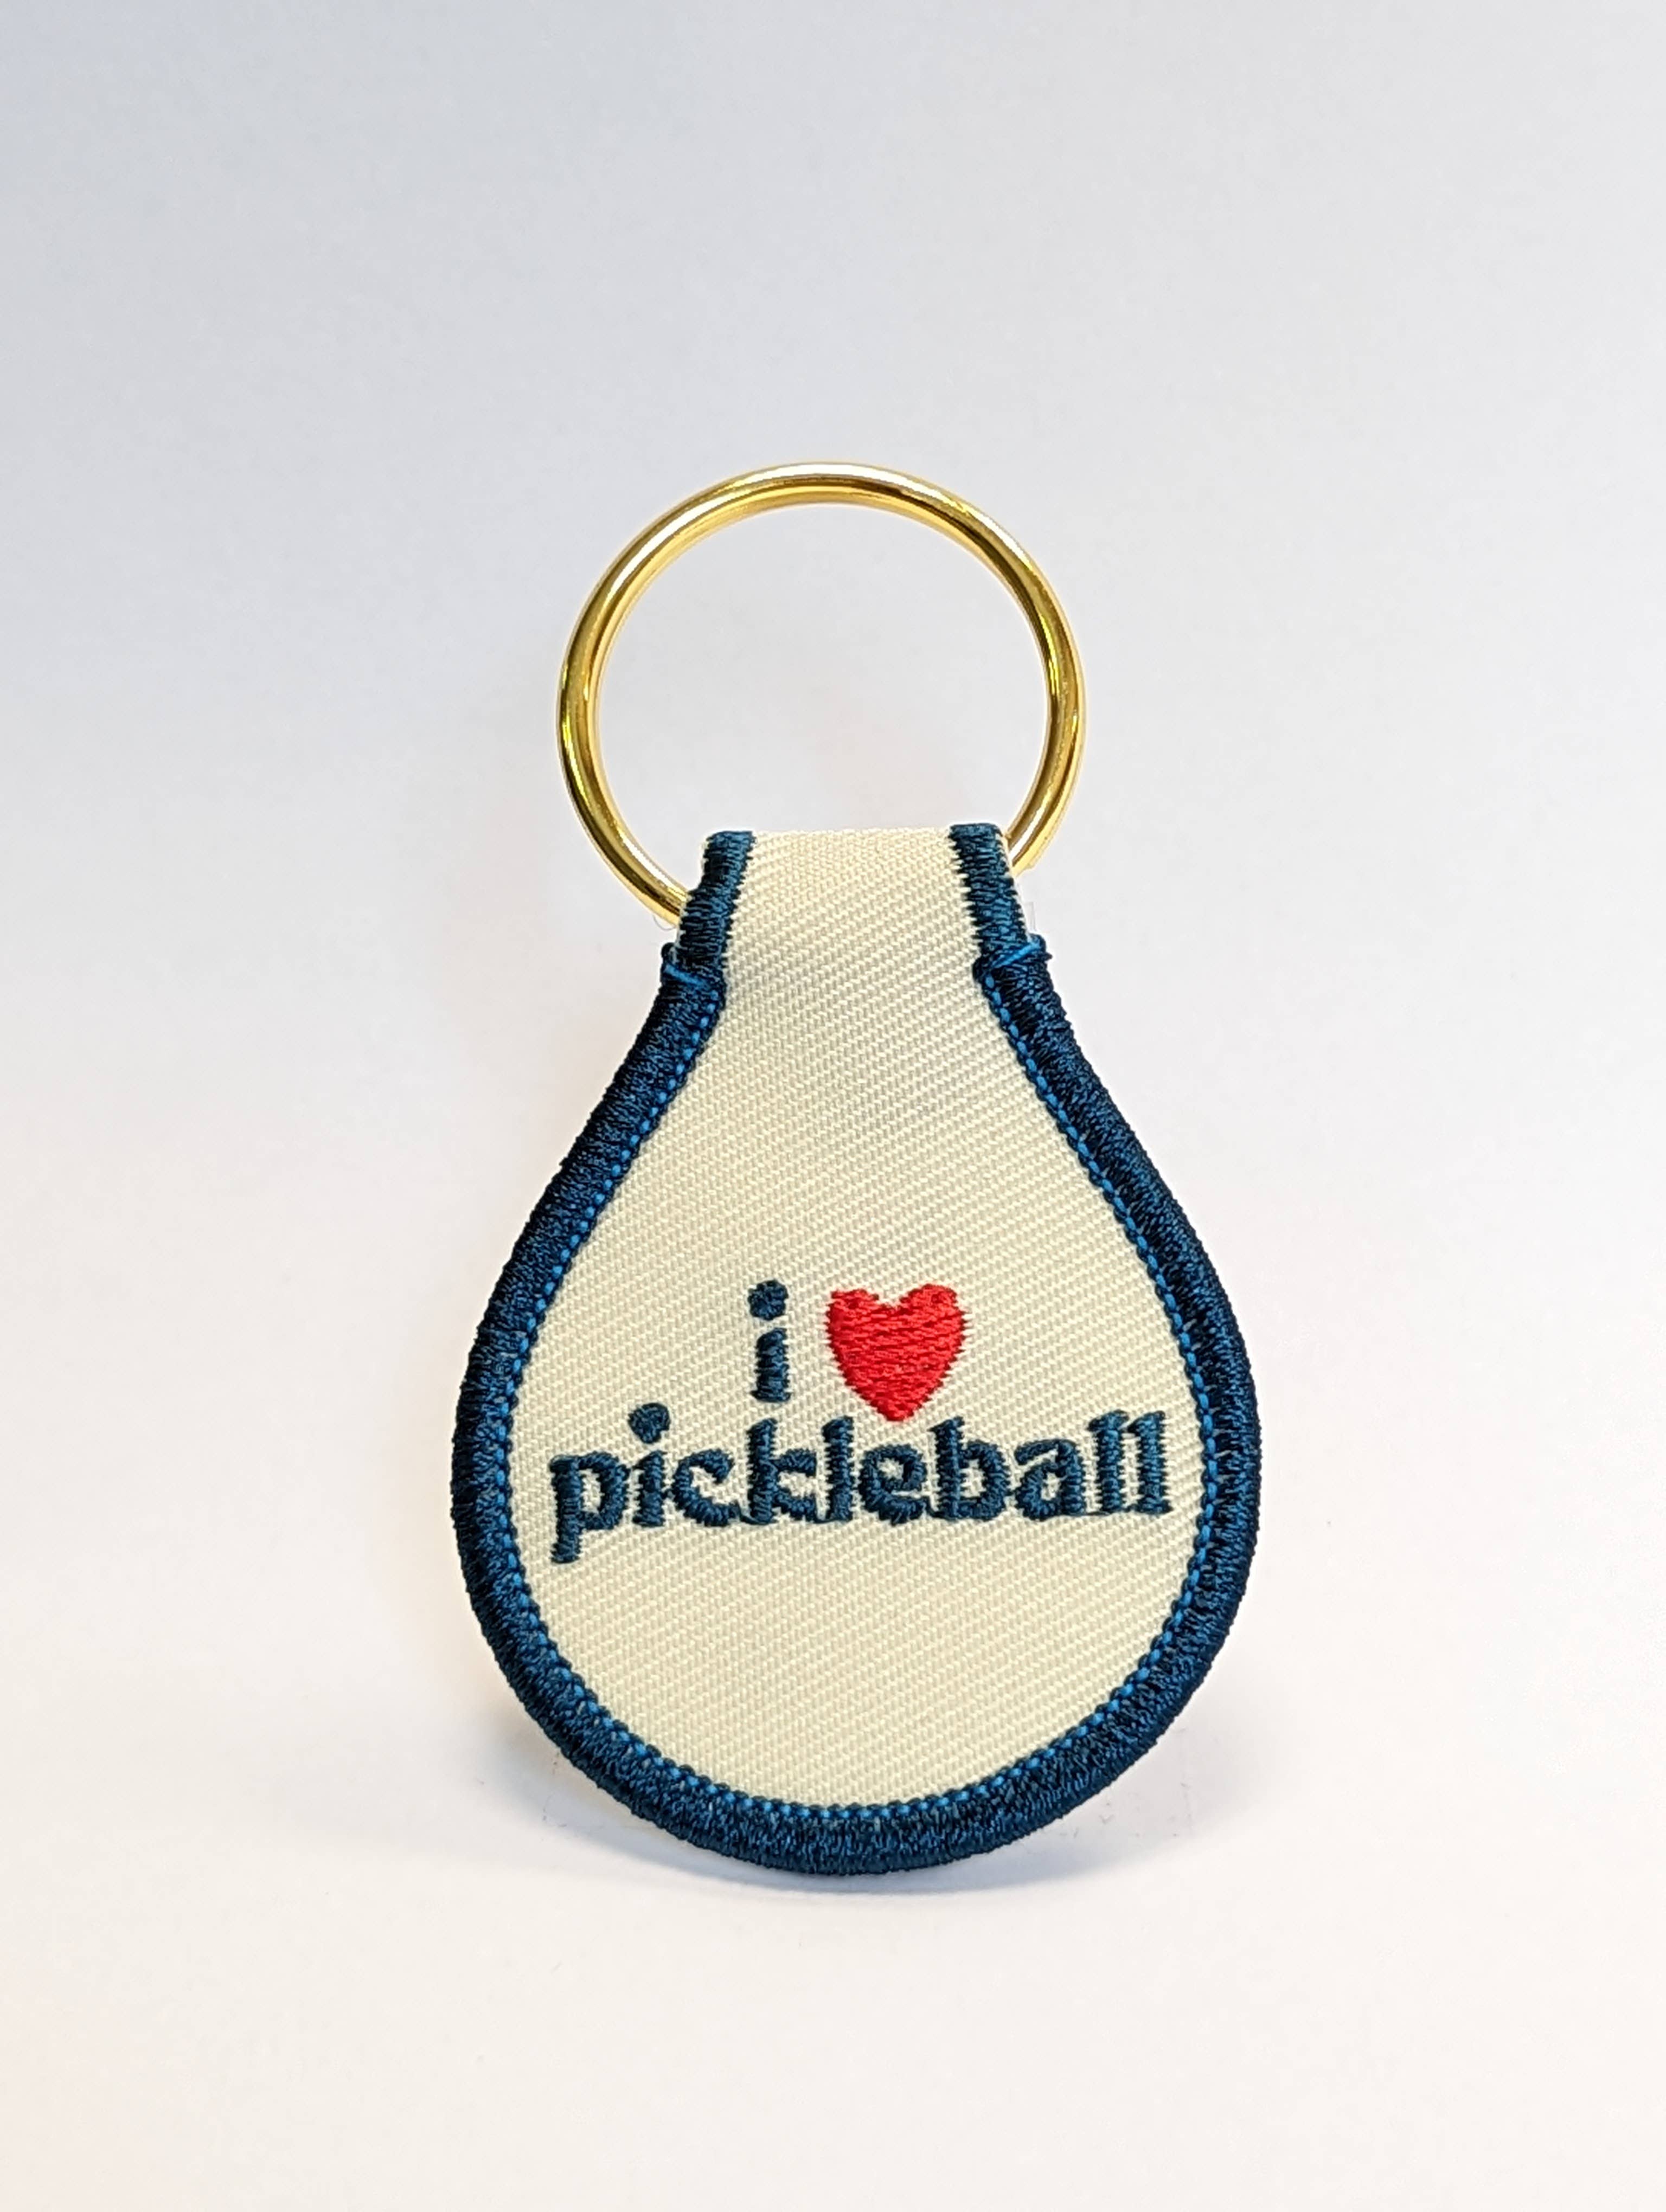 I Heart Pickleball Embroidered Key Tag